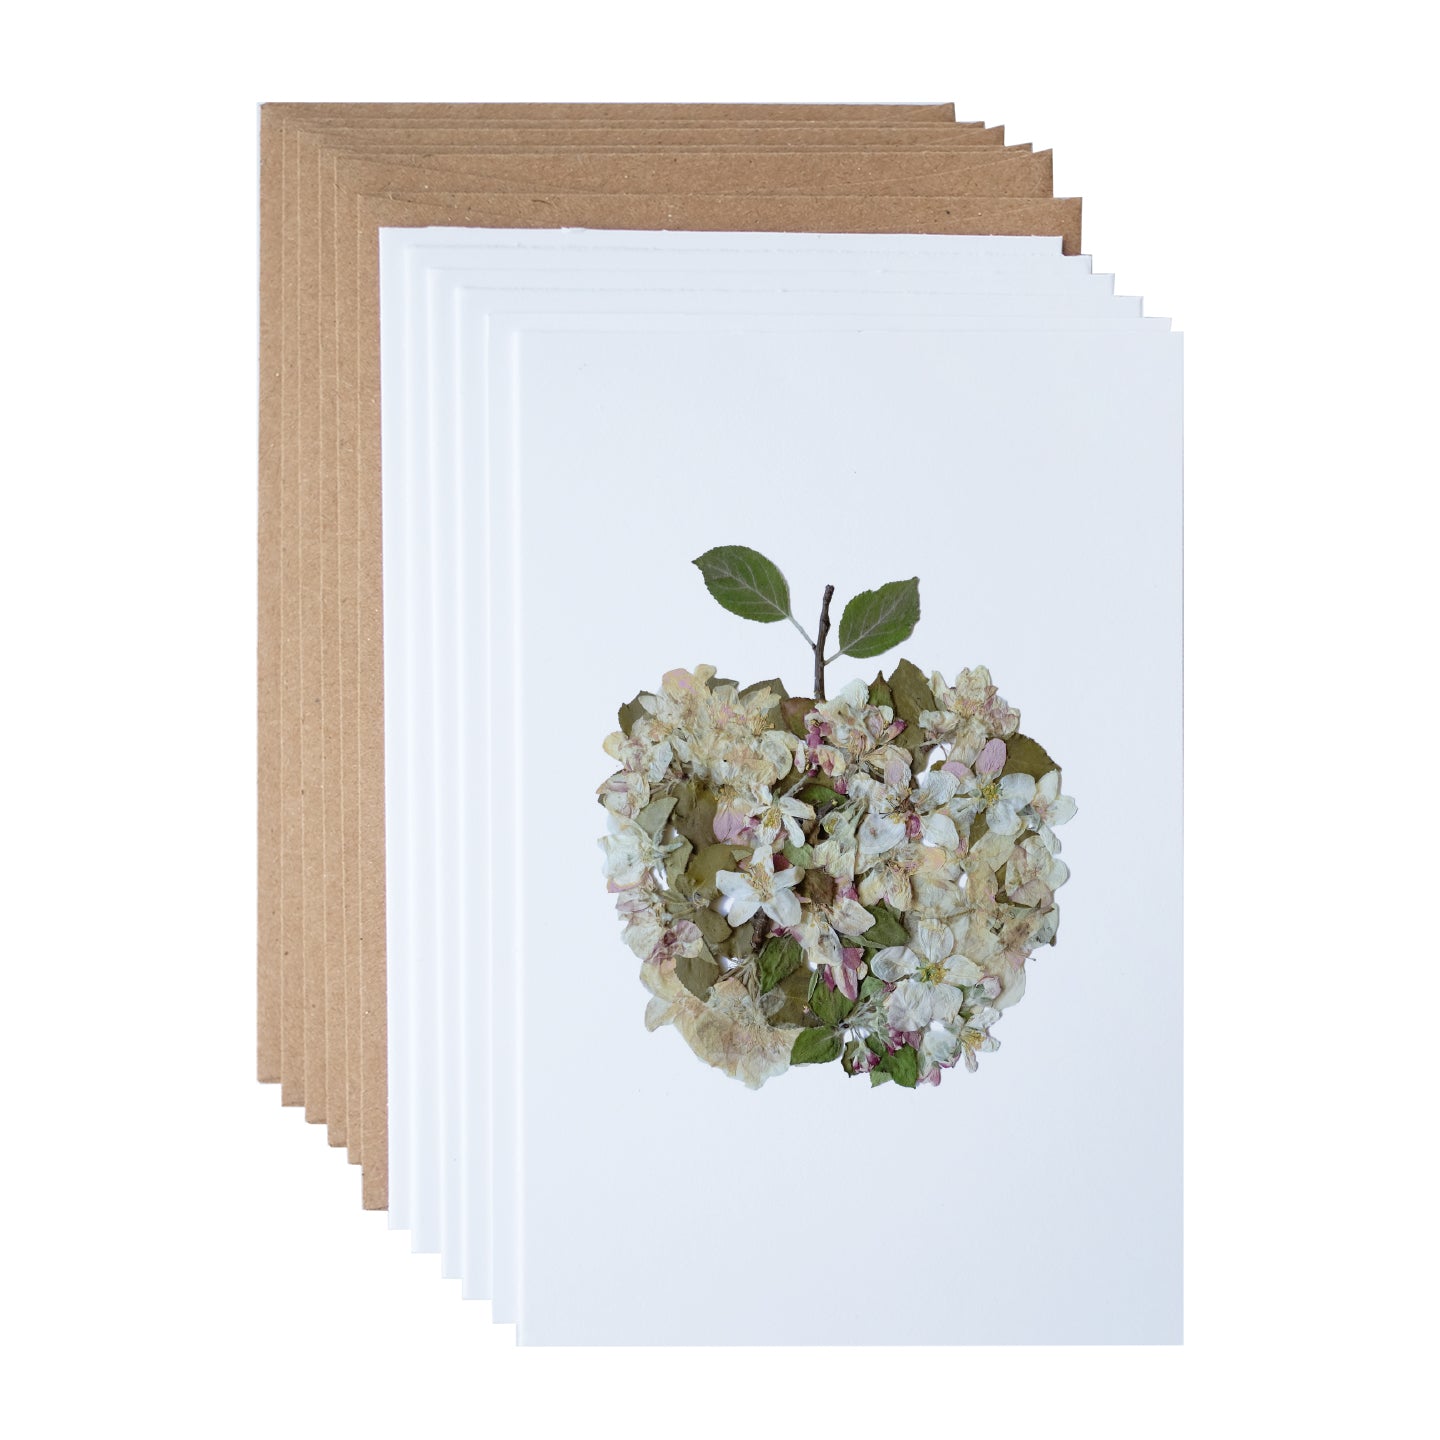 apple note card set artwork made from white pink and green apple blossom flowers and leaves 